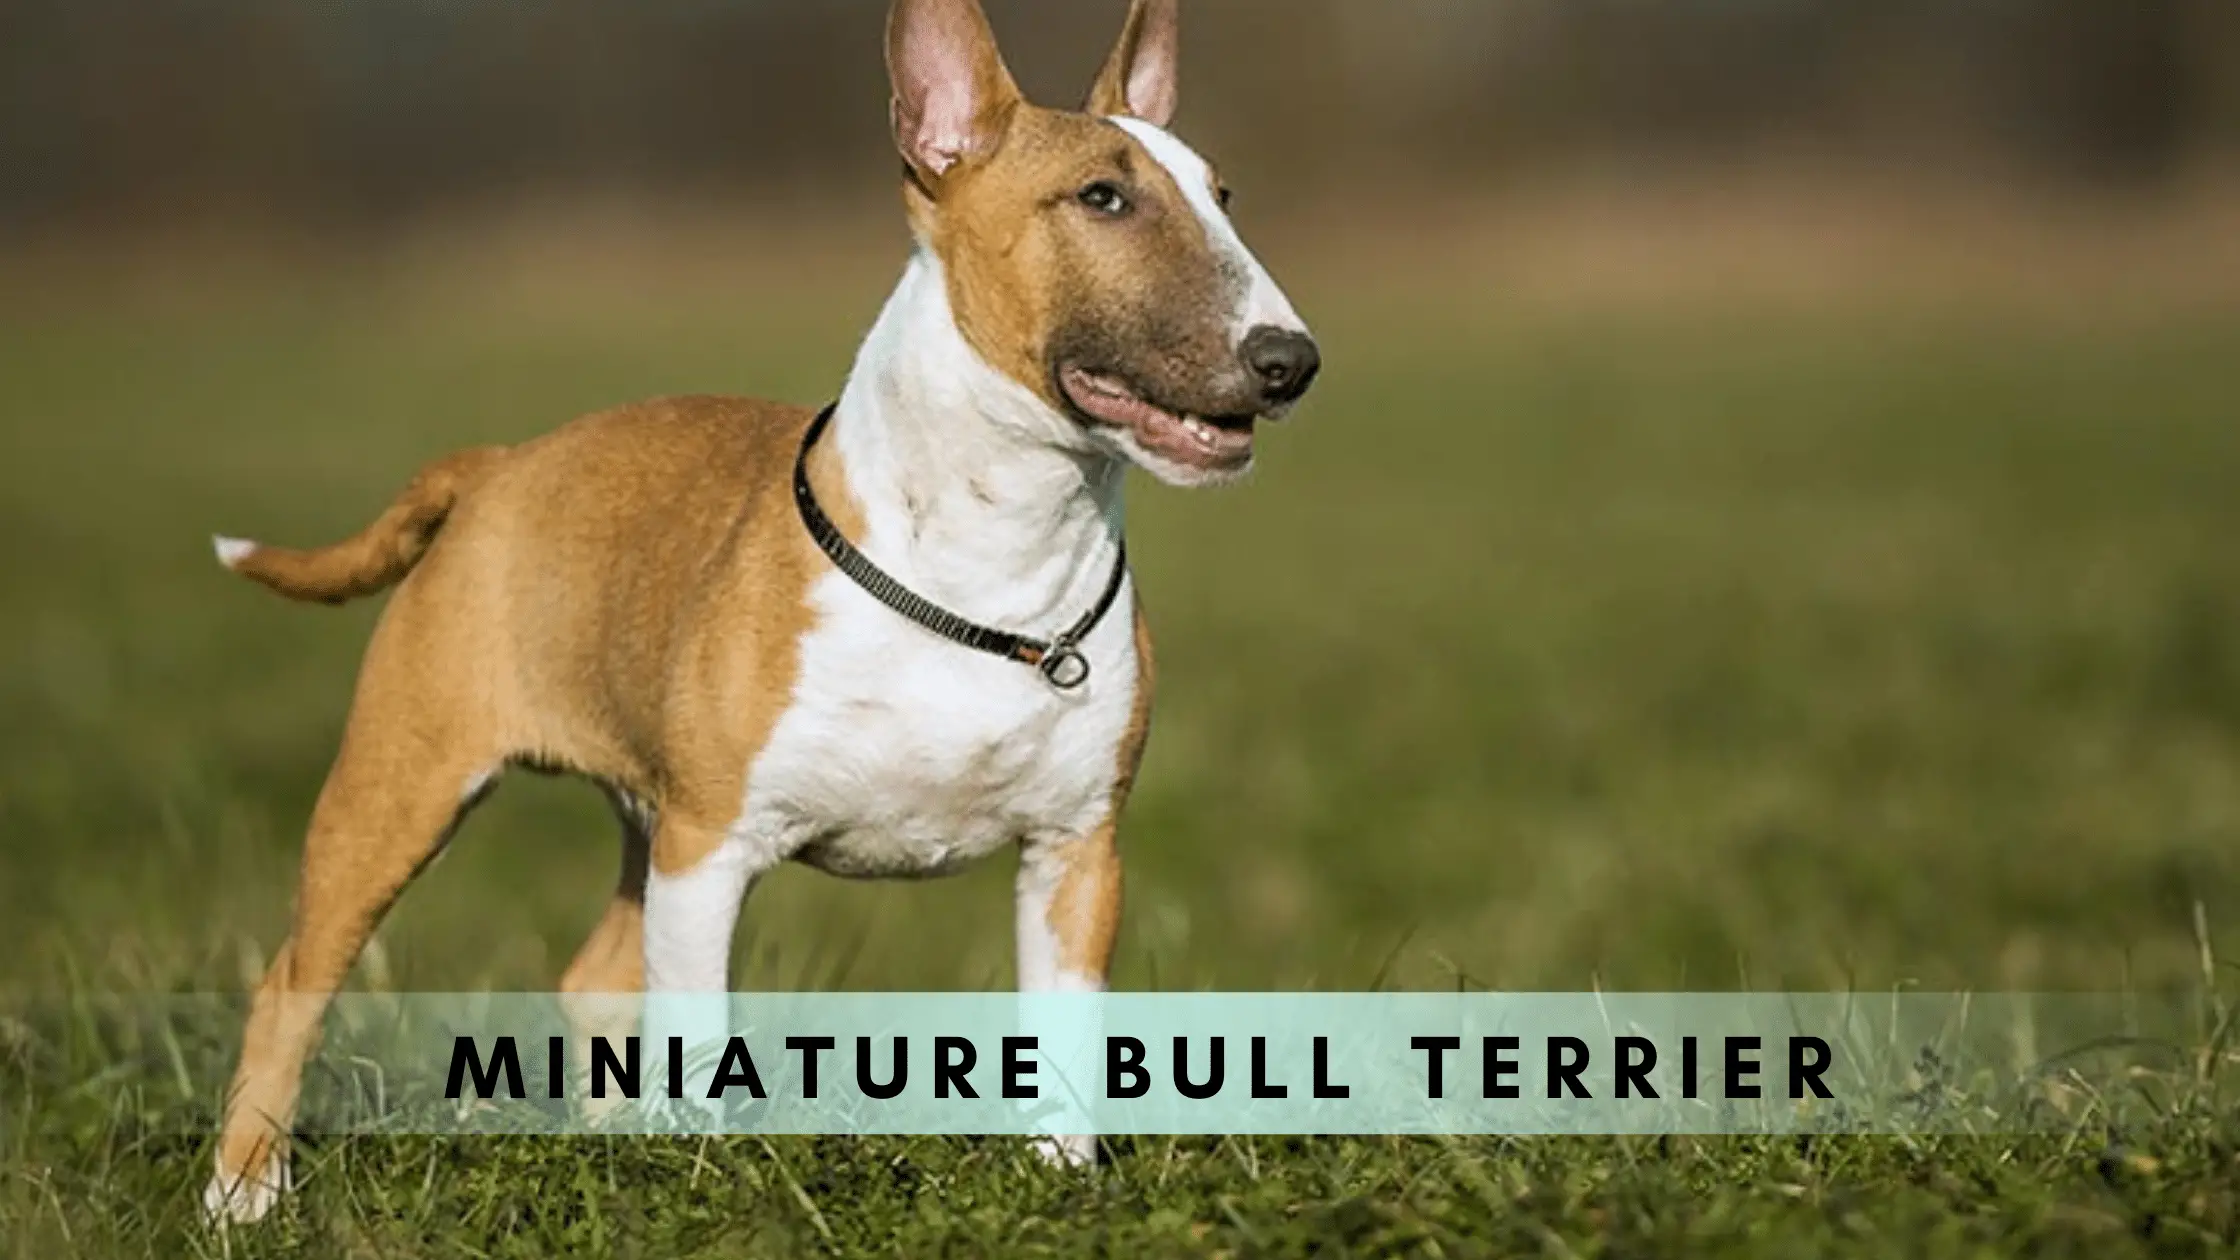 Miniature Bull Terrier – All You Need To About This Breed